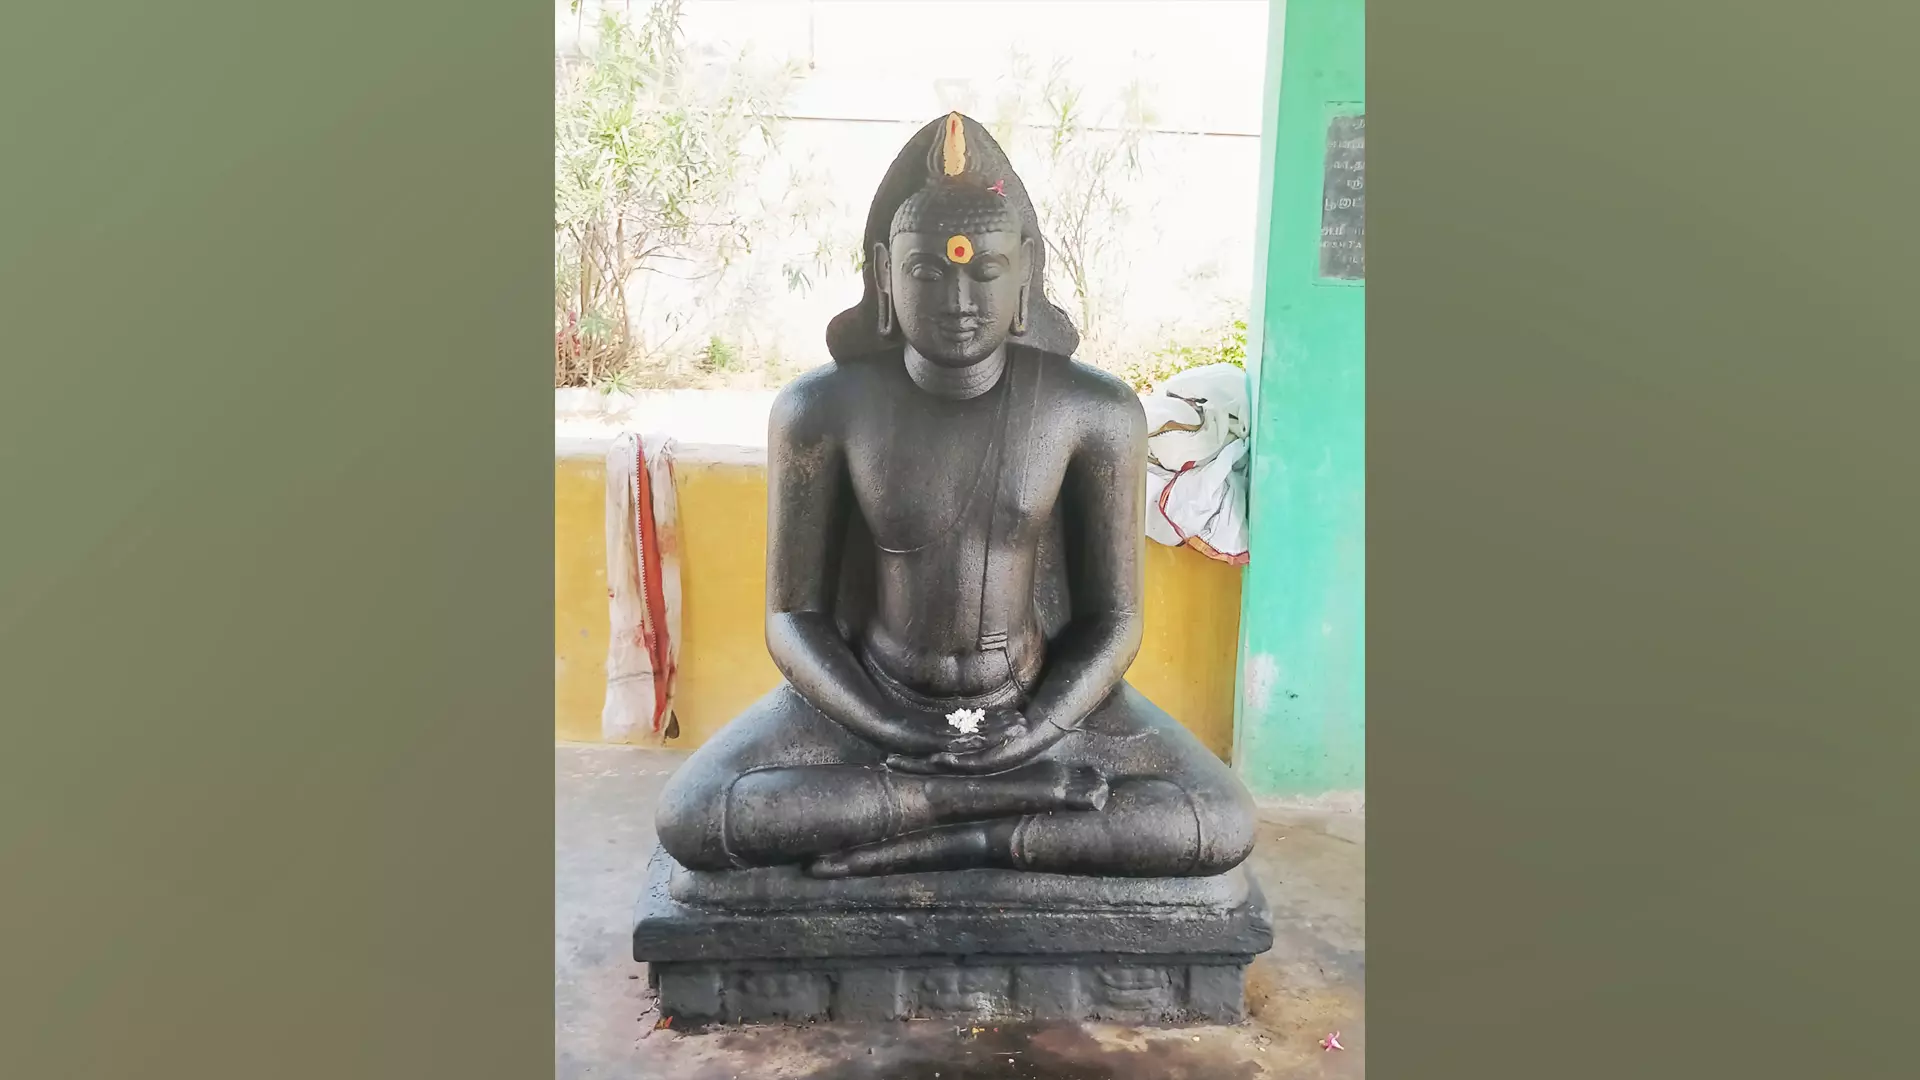 A statue found in Mangalam, Trichy district, Tamil Nadu. This is the Buddha statue found with a moustache.